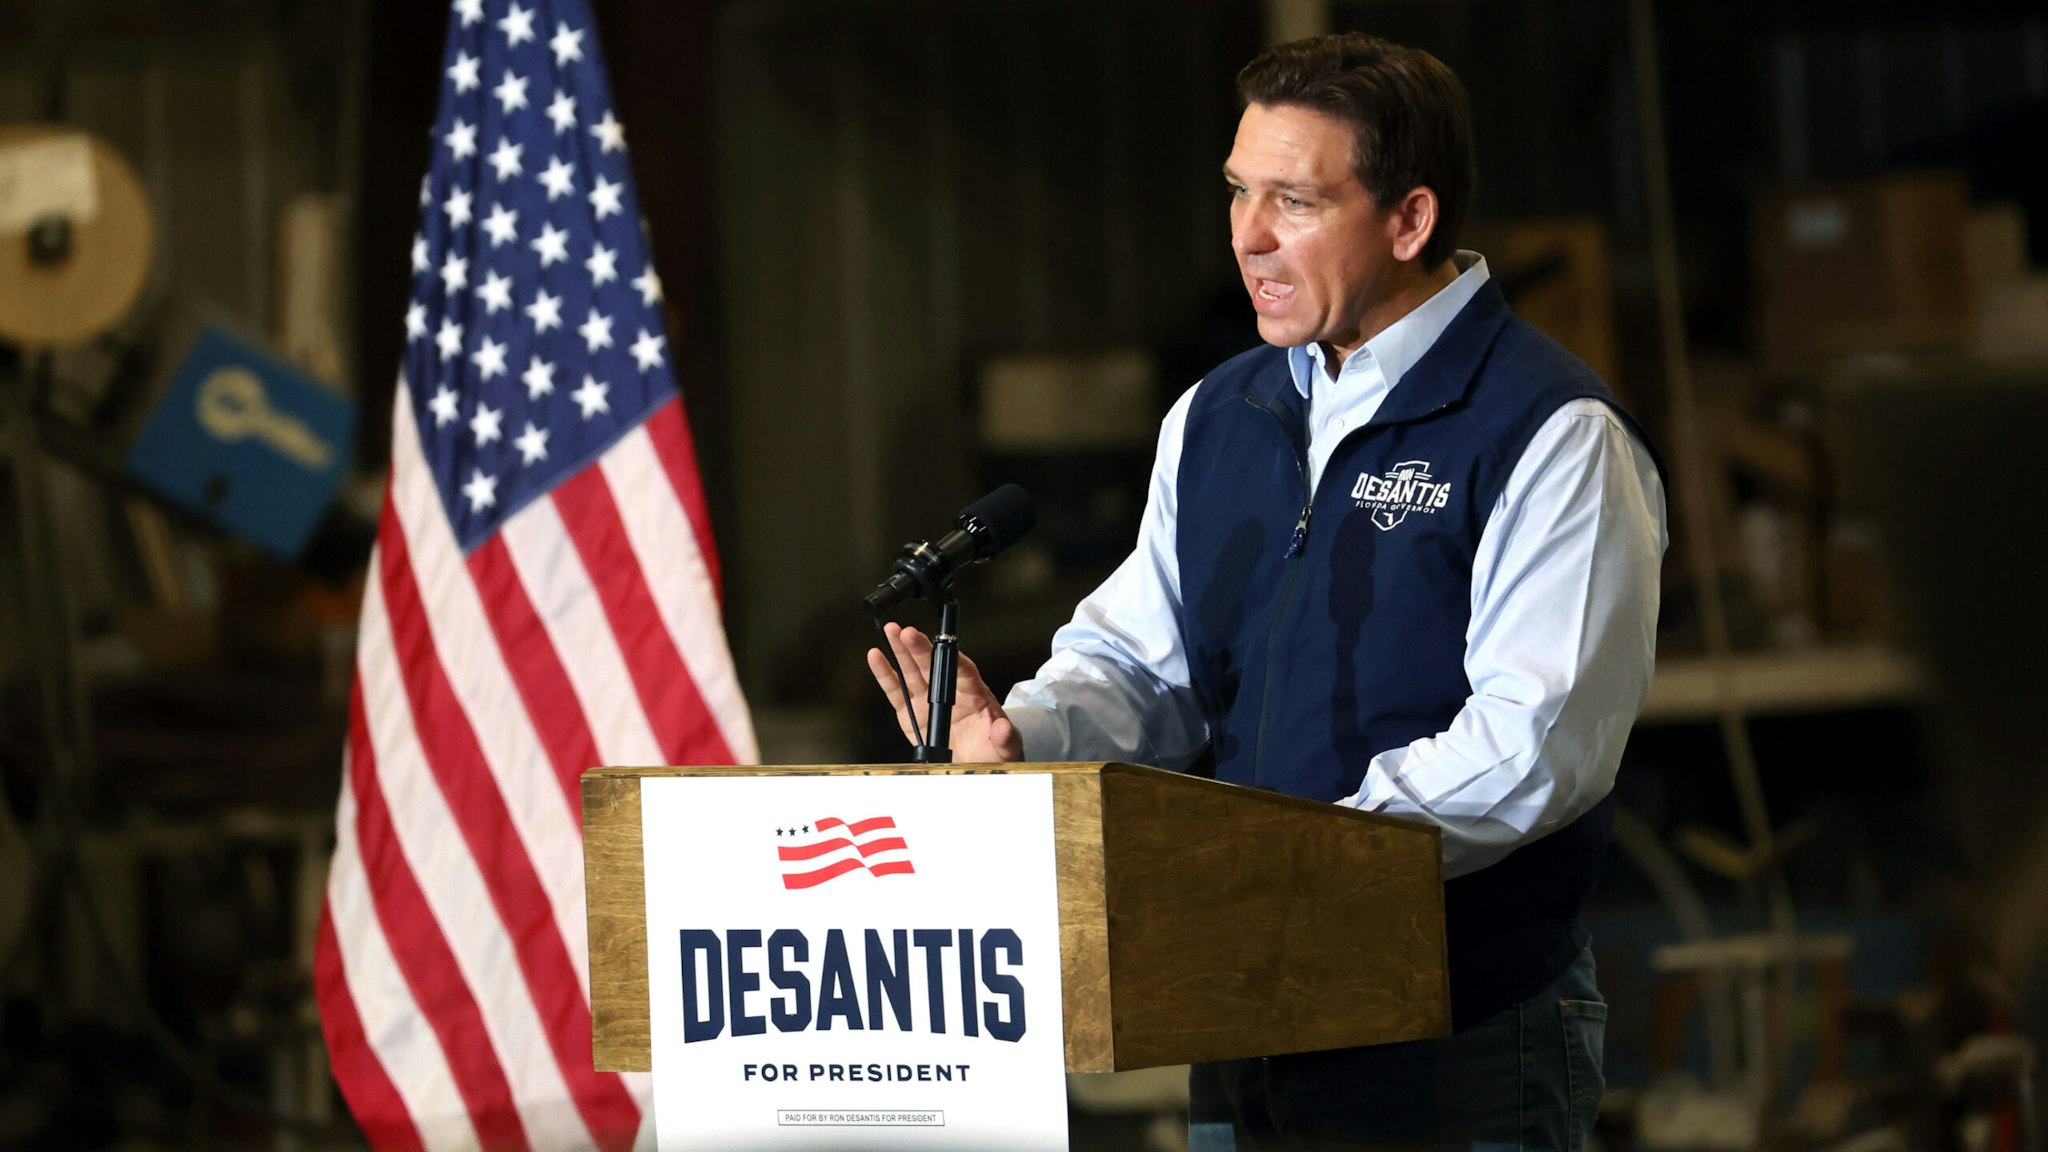 SALIX, IOWA - MAY 31: Republican presidential candidate Florida Governor Ron DeSantis speaks during a campaign rally at Port Neal Welding Company on May 31, 2023 in Salix, Iowa. The event is the second of five campaign events DeSantis has scheduled in the state over two days.